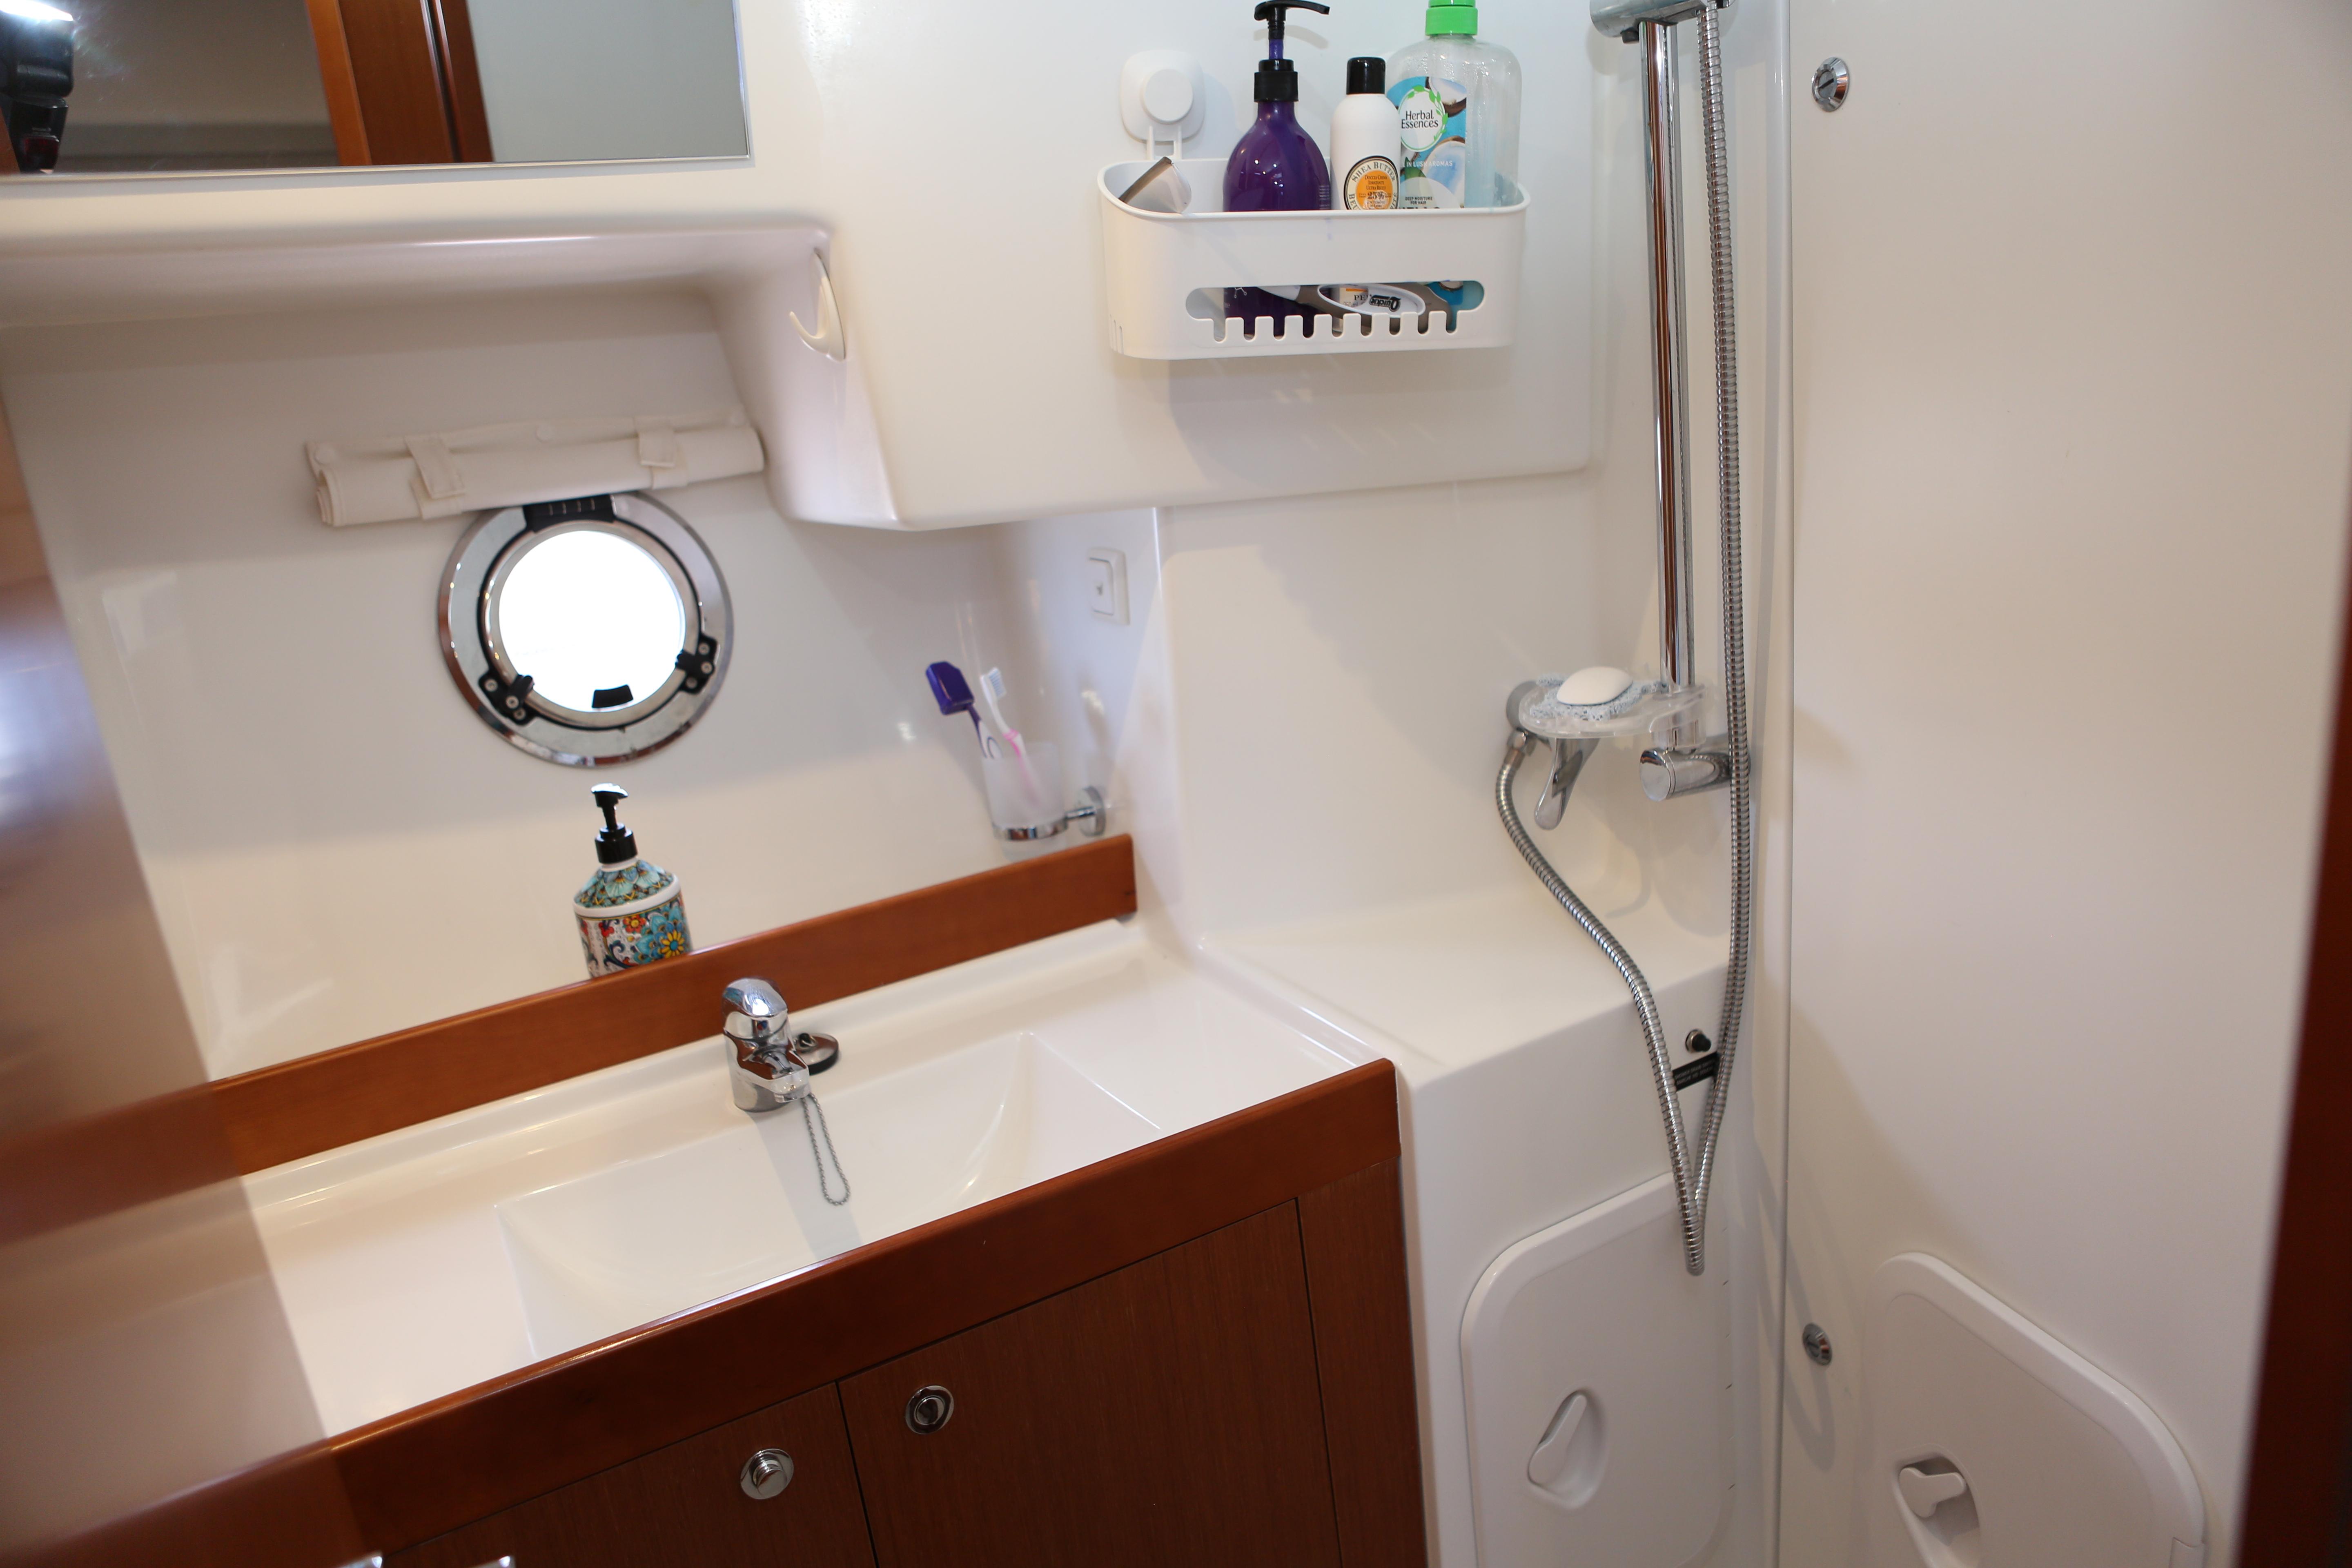 Separate shower compartment in head